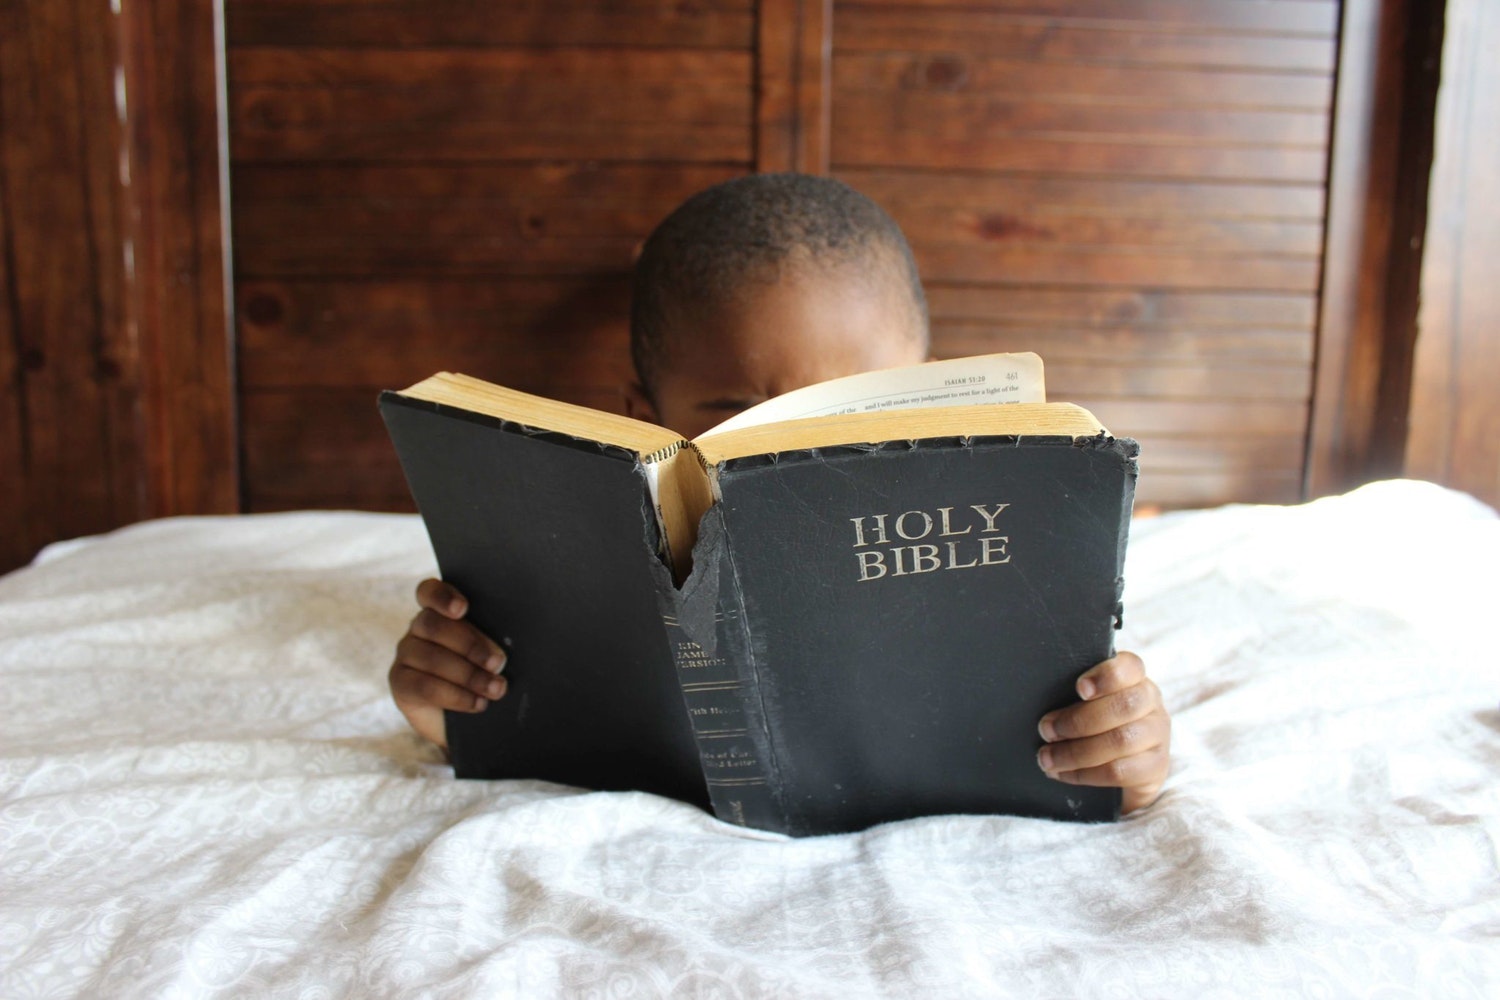 A child in bed reading Bible verses.